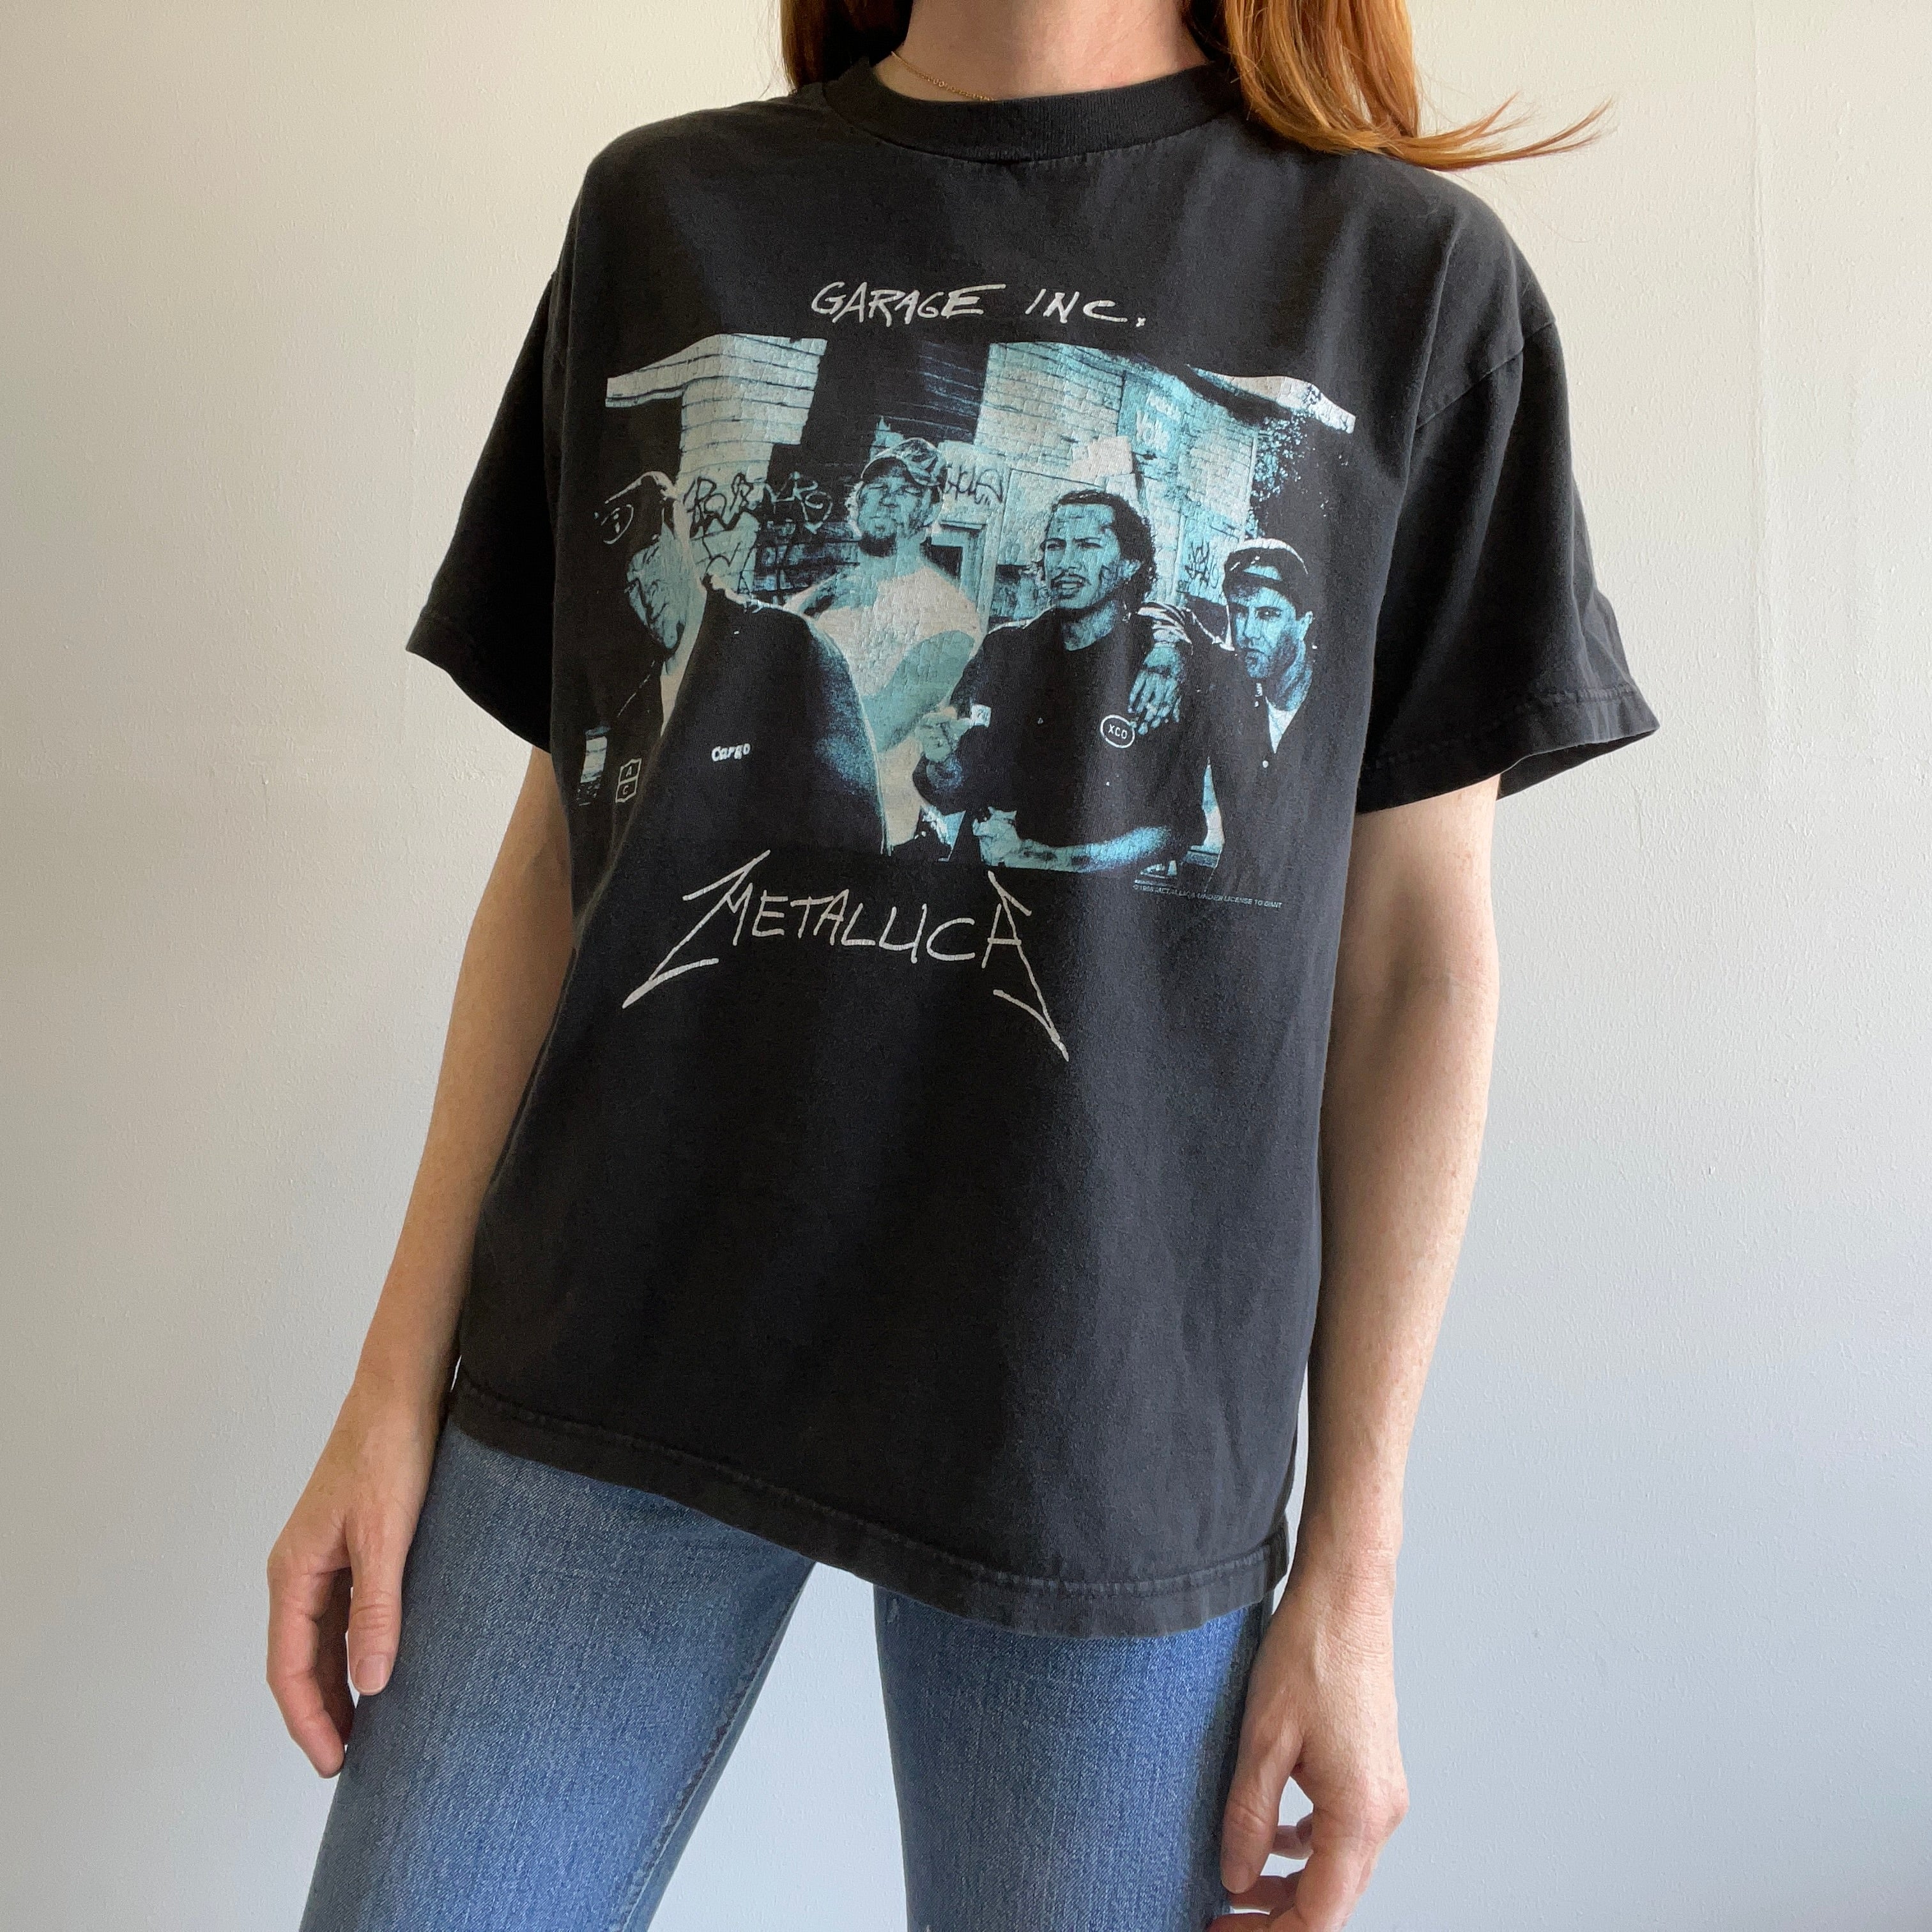 1998 Metallica T-Shirt Reprint by Giant – Red Vintage Co